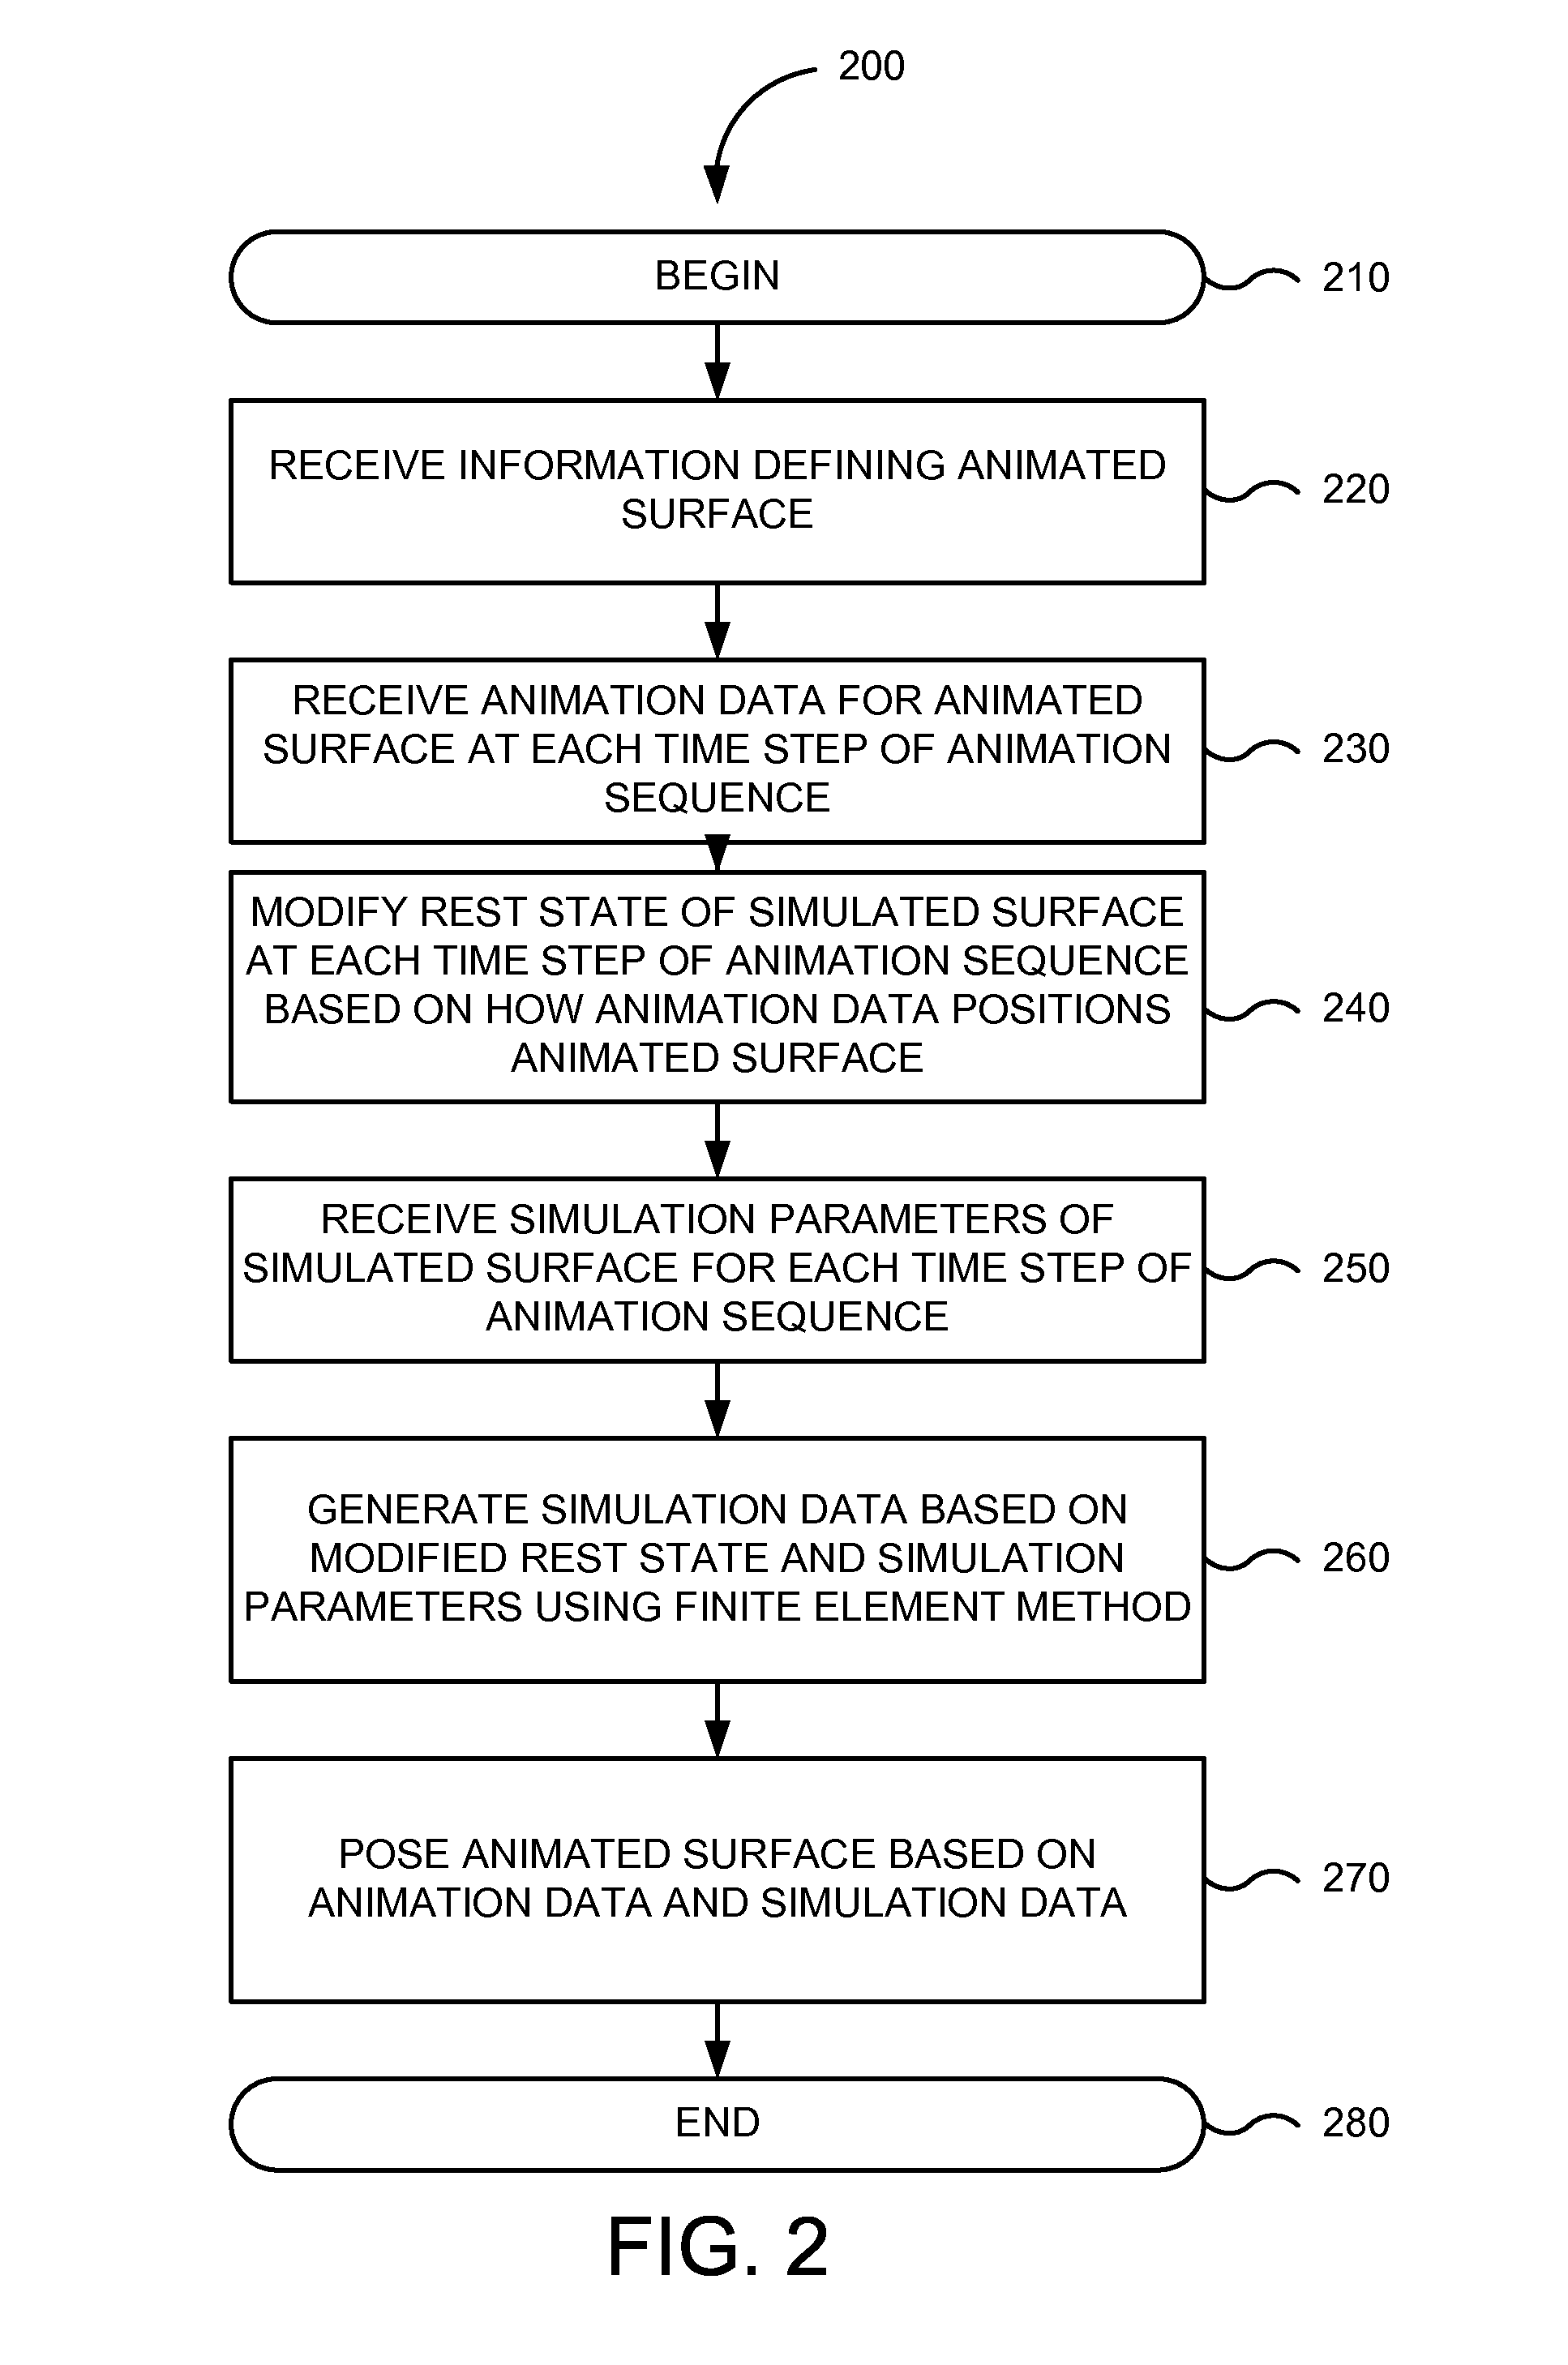 Systems and methods for generating skin and volume details for animated characters